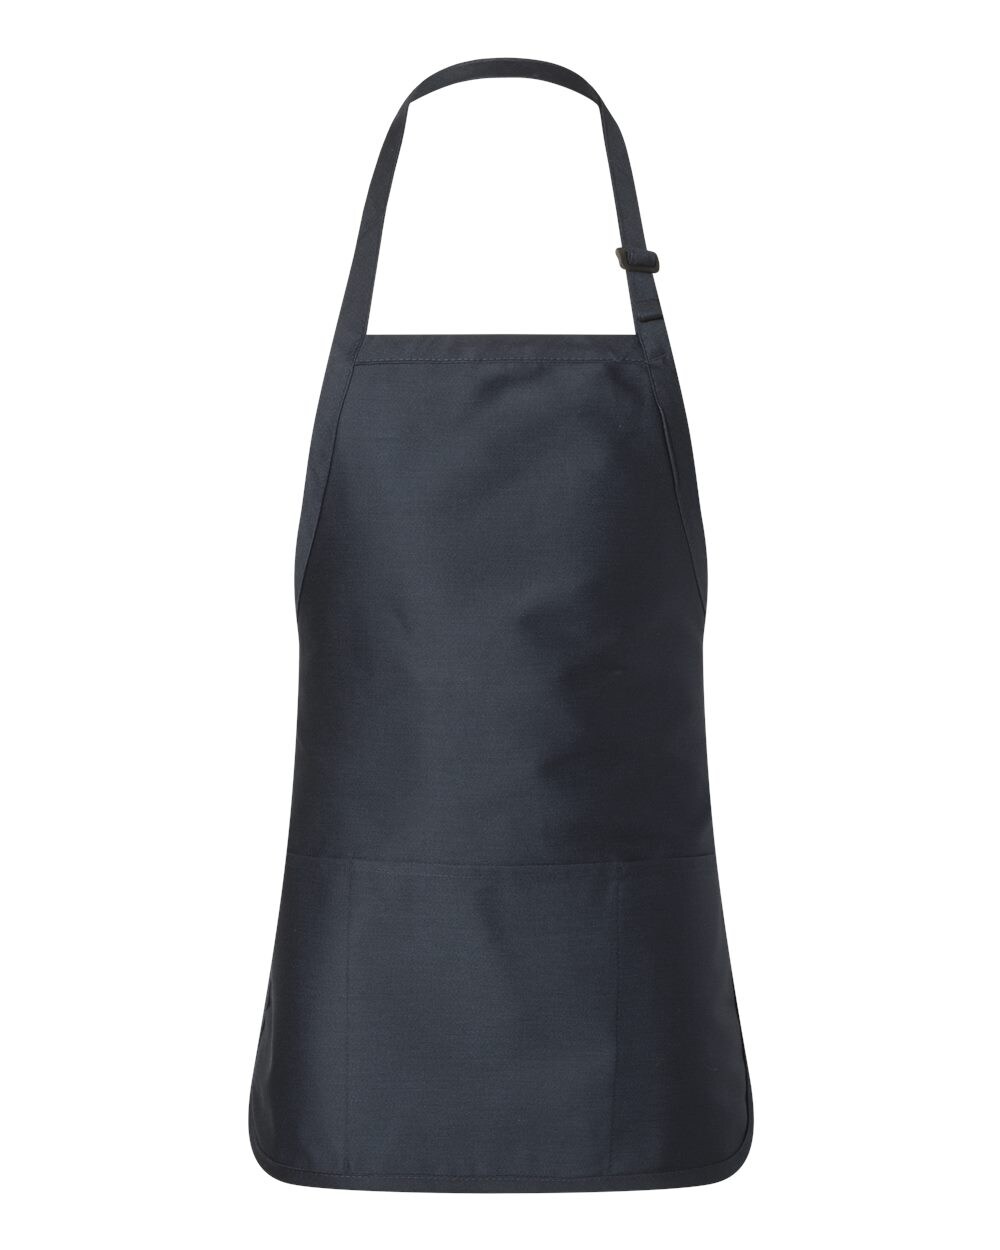 Q-Tees® Full-Length Apron with Pouch Pocket